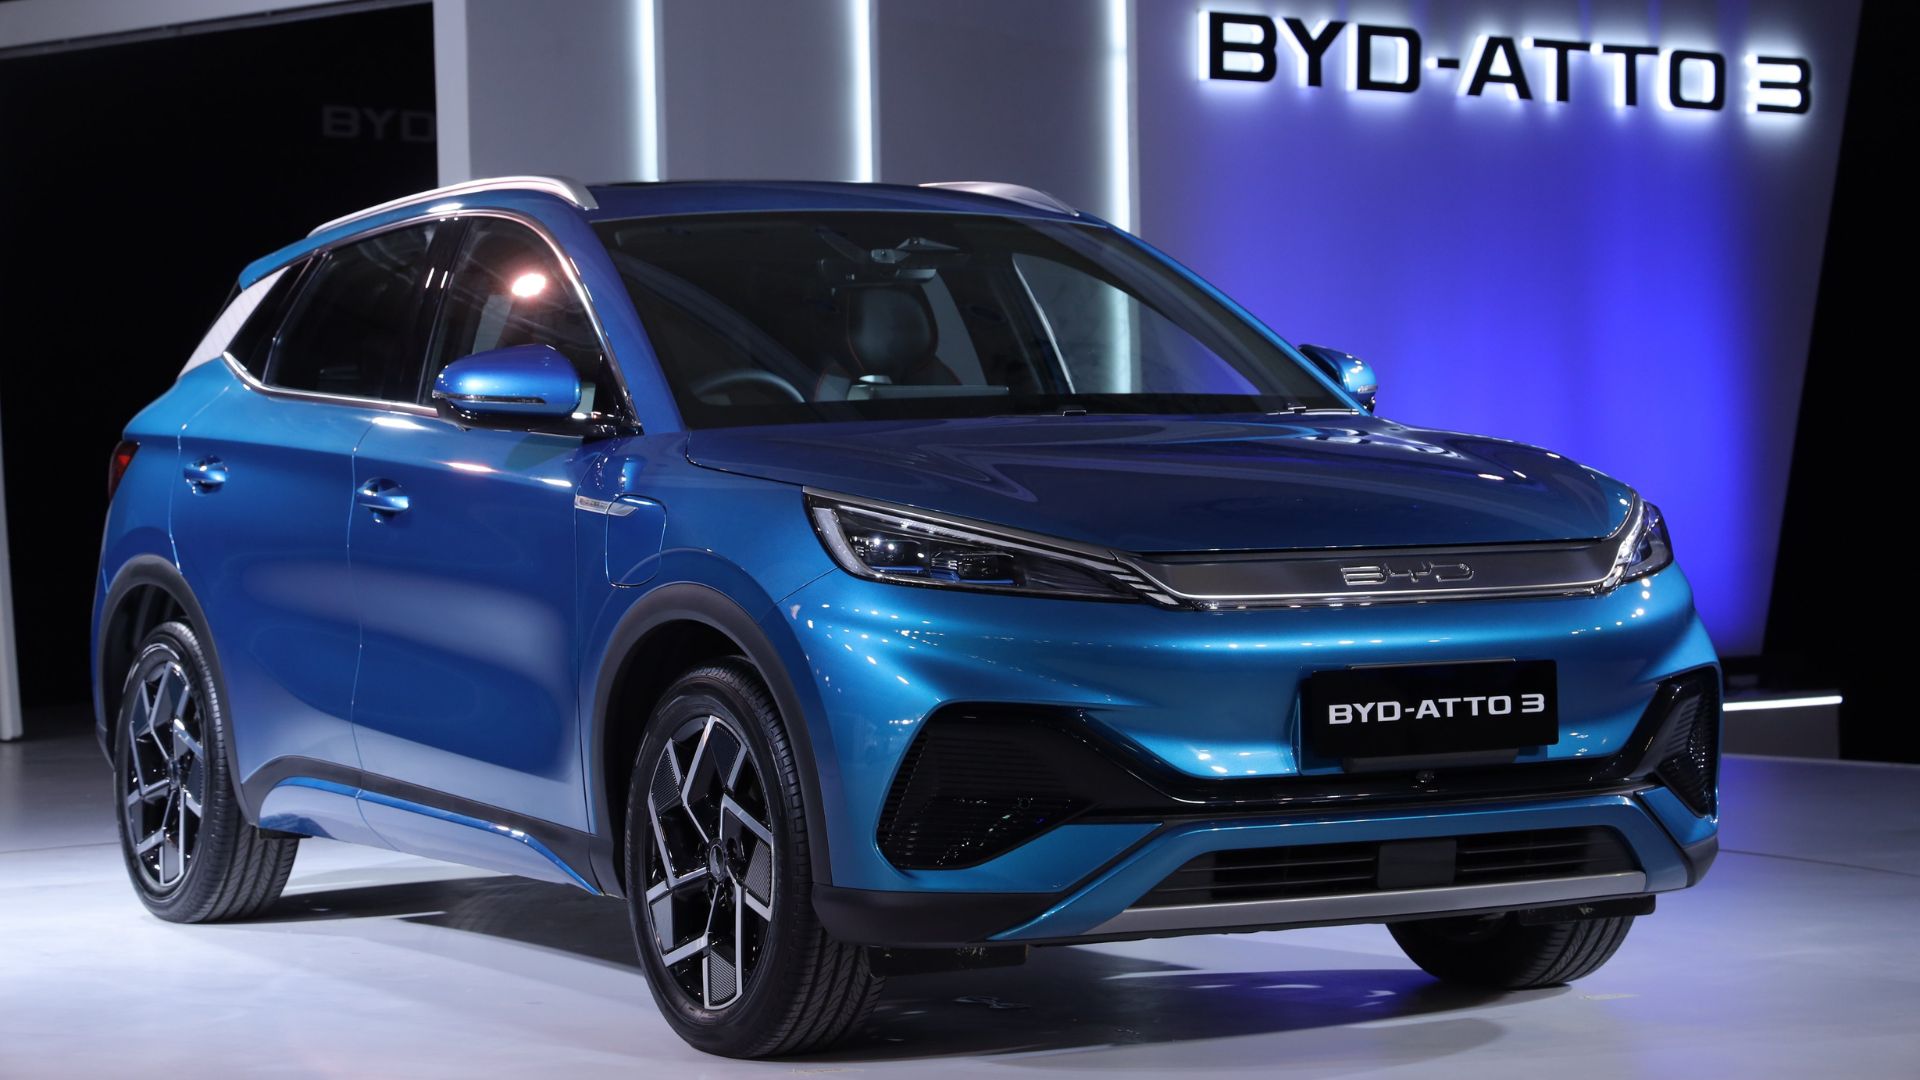 https://e-vehicleinfo.com/byd-atto-3-launched-offers-a-521km-range-in-full-charge/